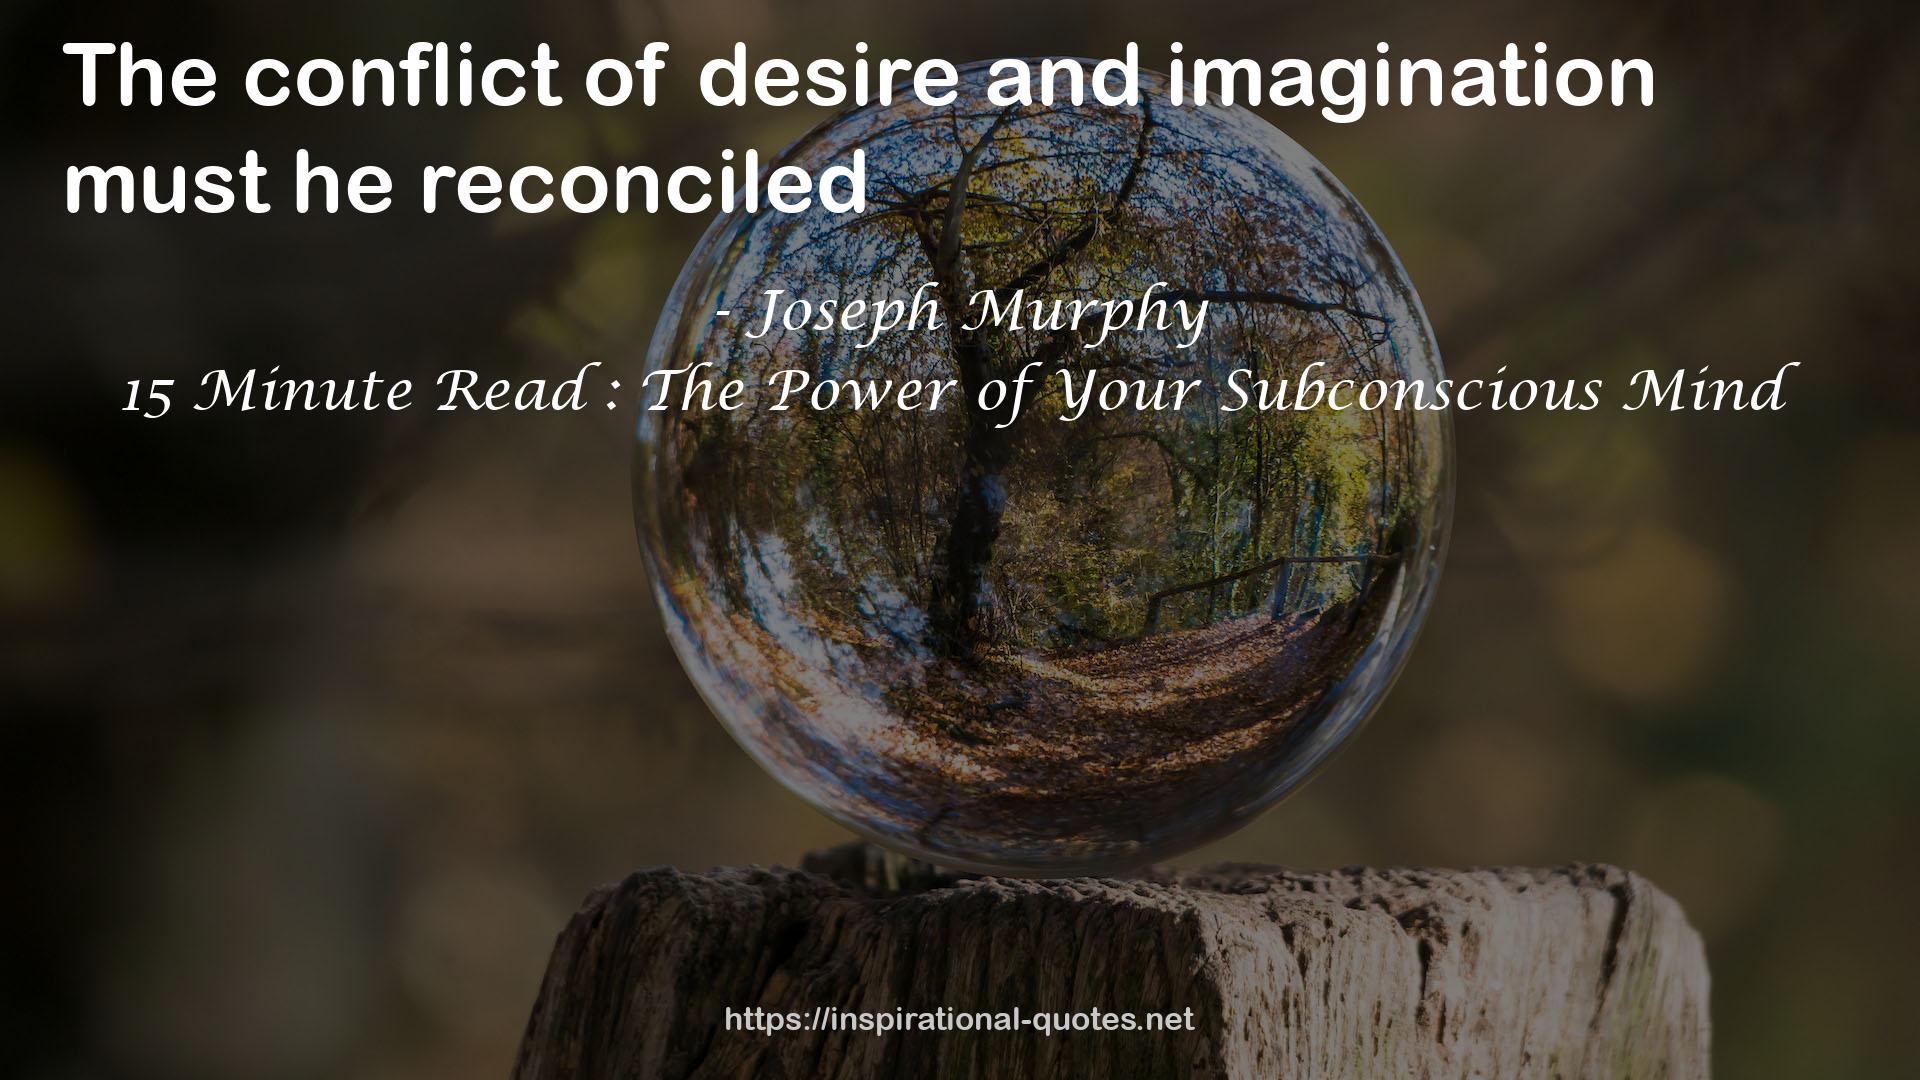 15 Minute Read : The Power of Your Subconscious Mind QUOTES